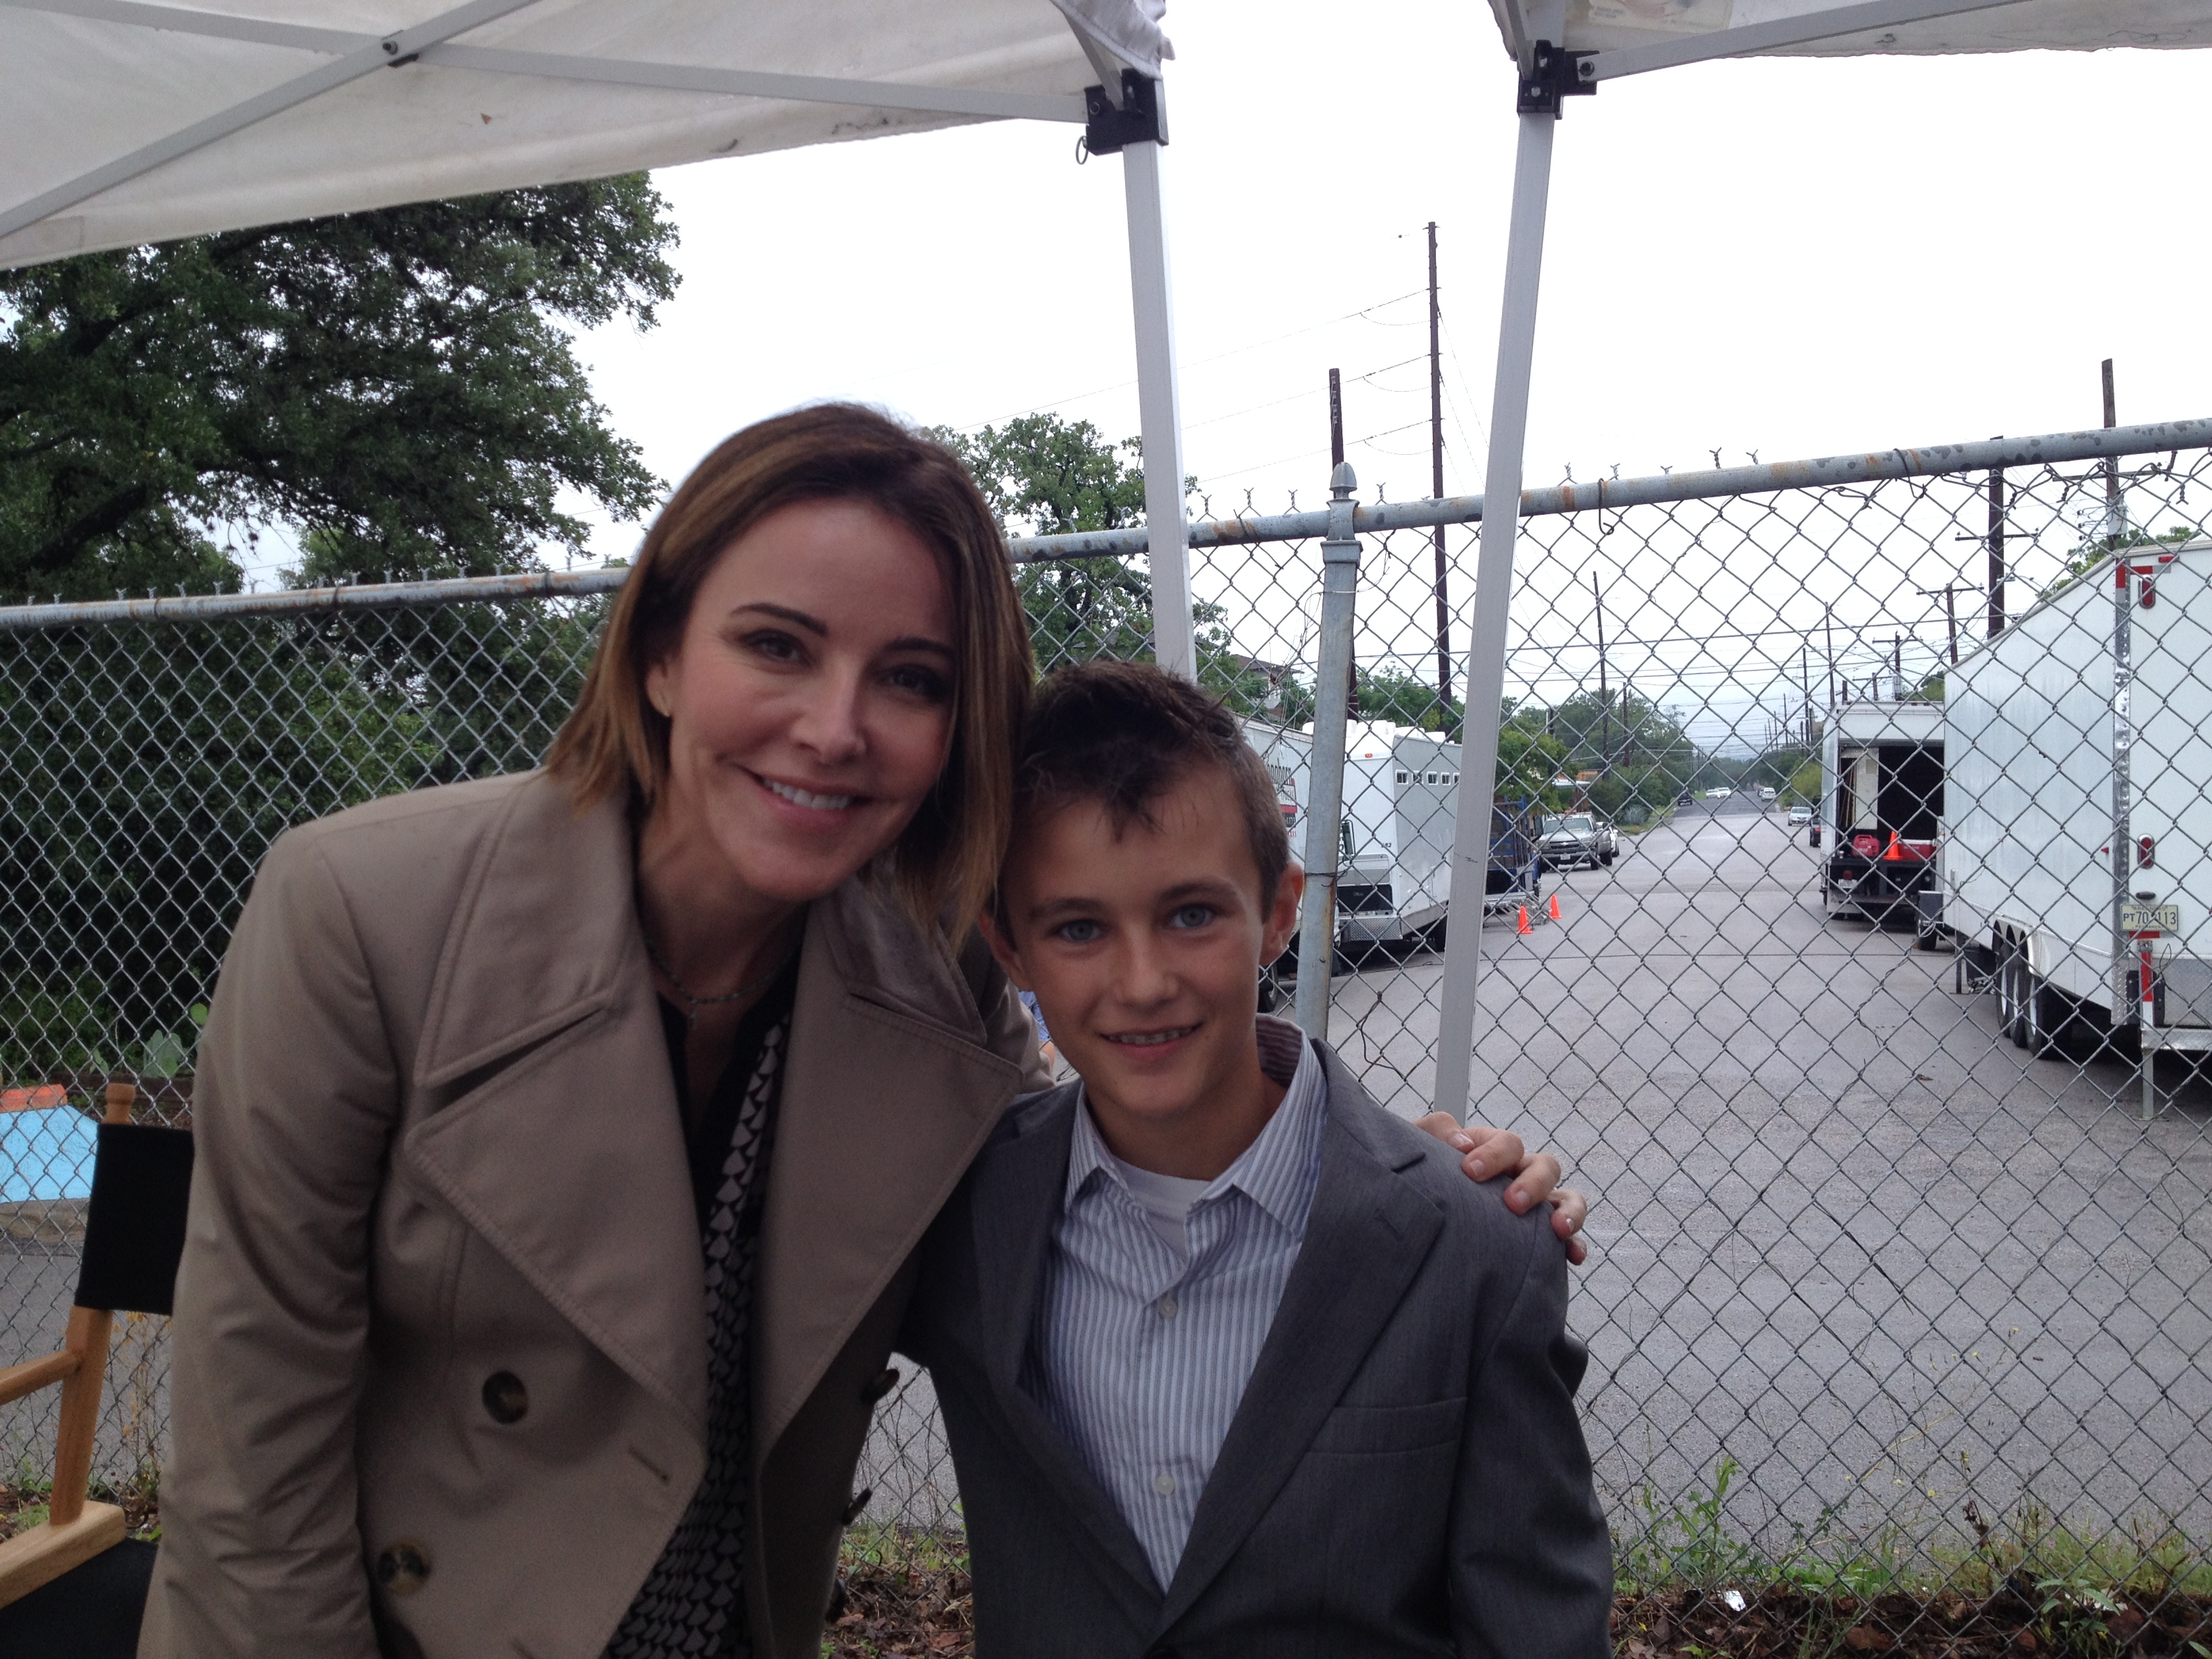 Trent and Christa Miller on set of 